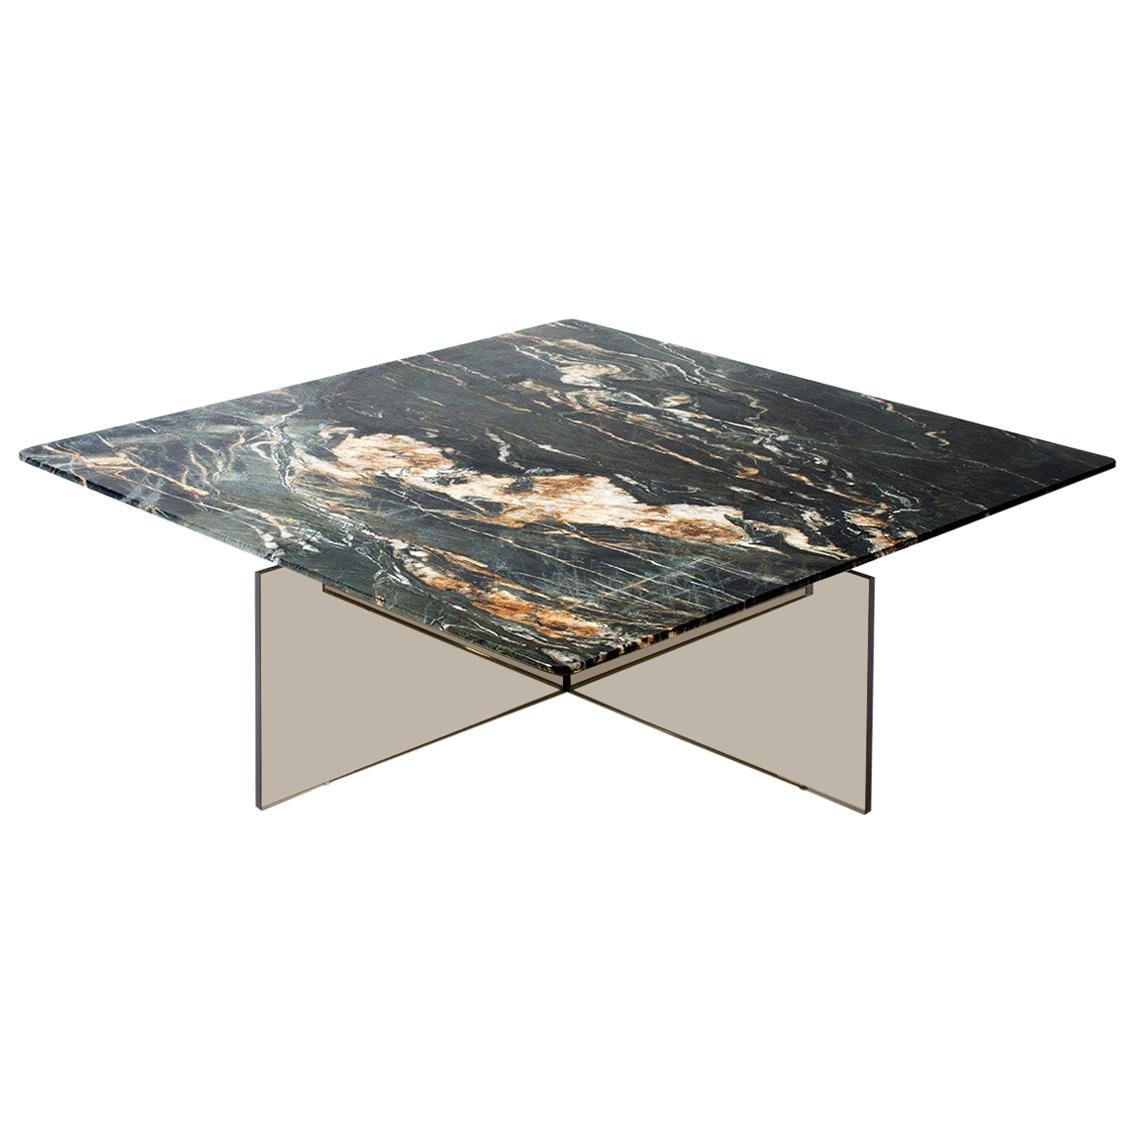 Claste Beside Myself Small Coffee Table in Belvedere Black Marble and Glass Base